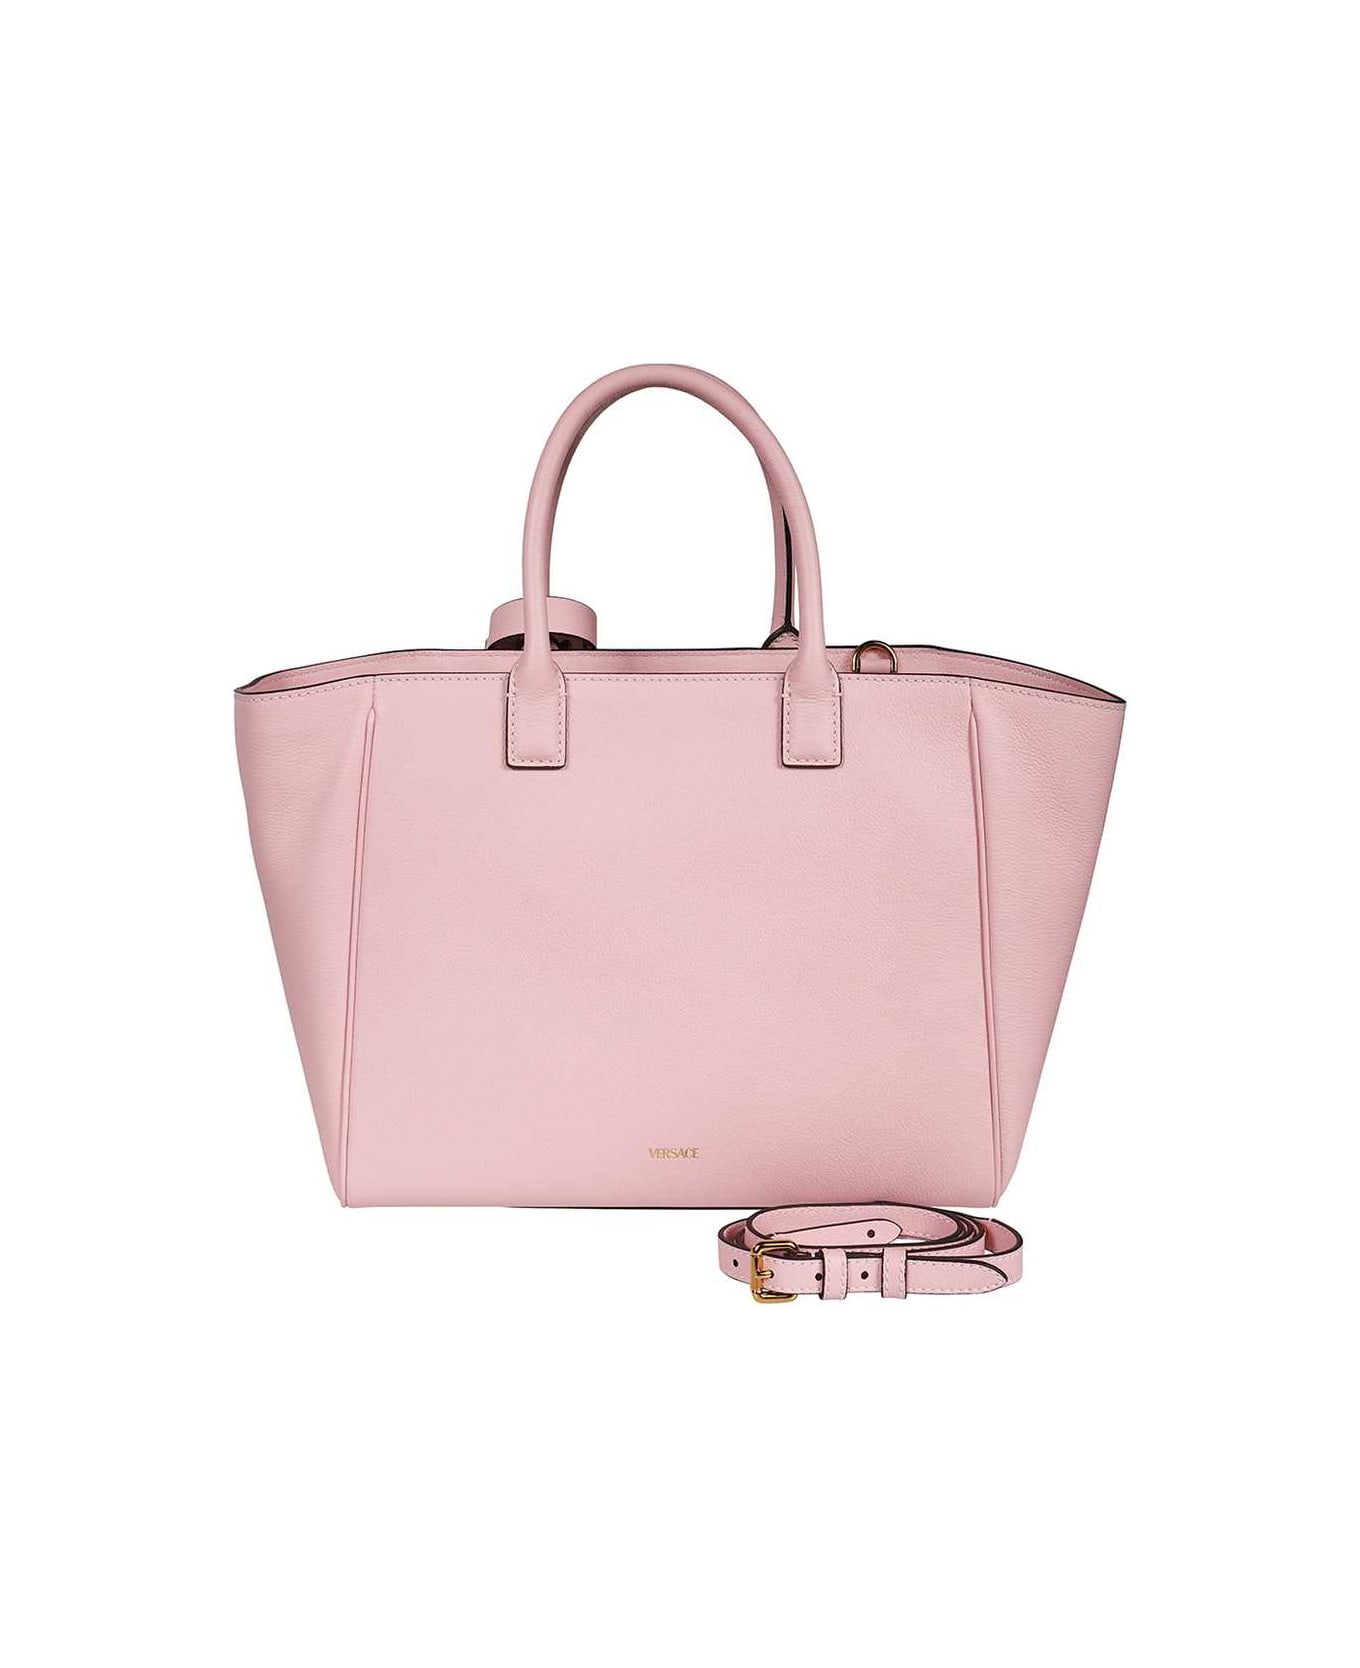 Versace Leather Tote - Pink